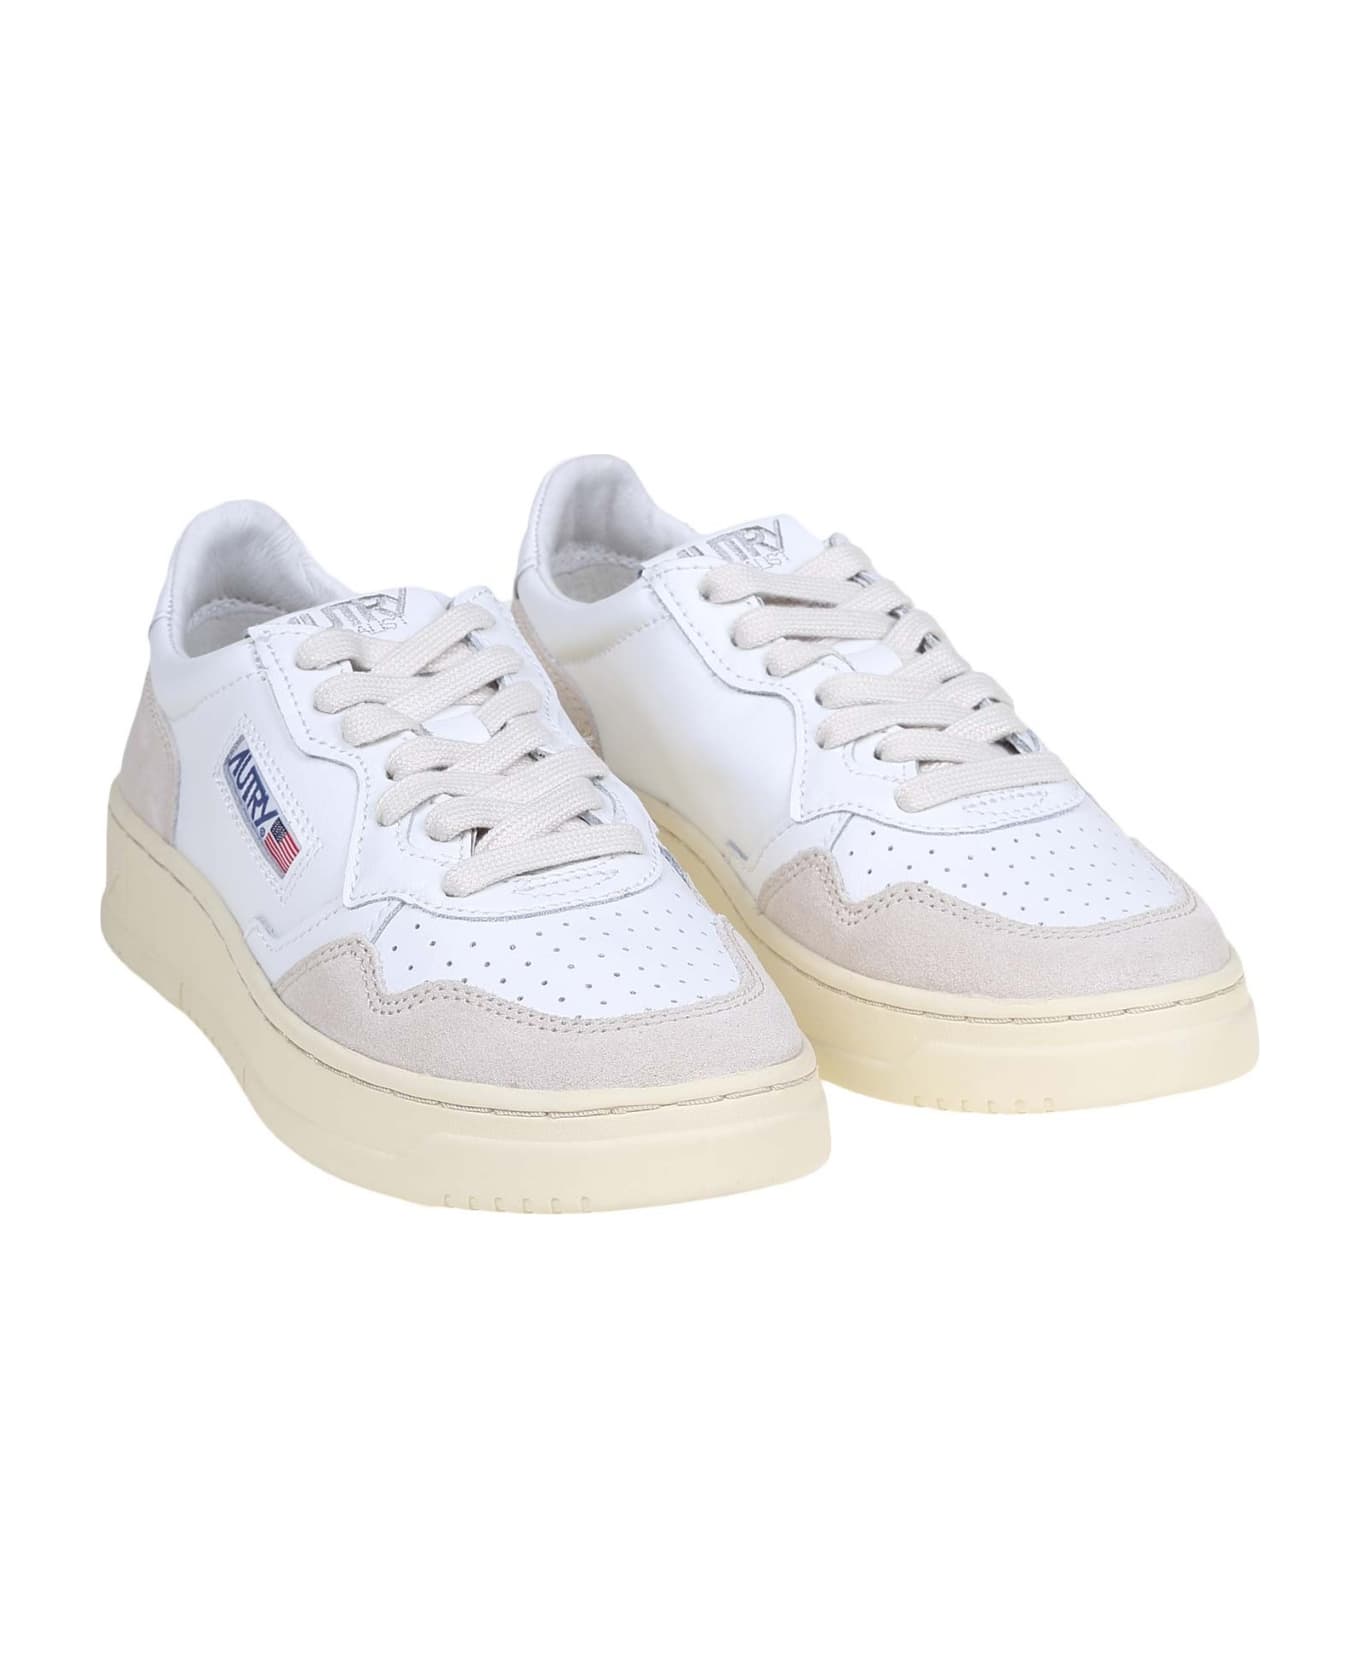 Autry White Leather Sneakers - White スニーカー